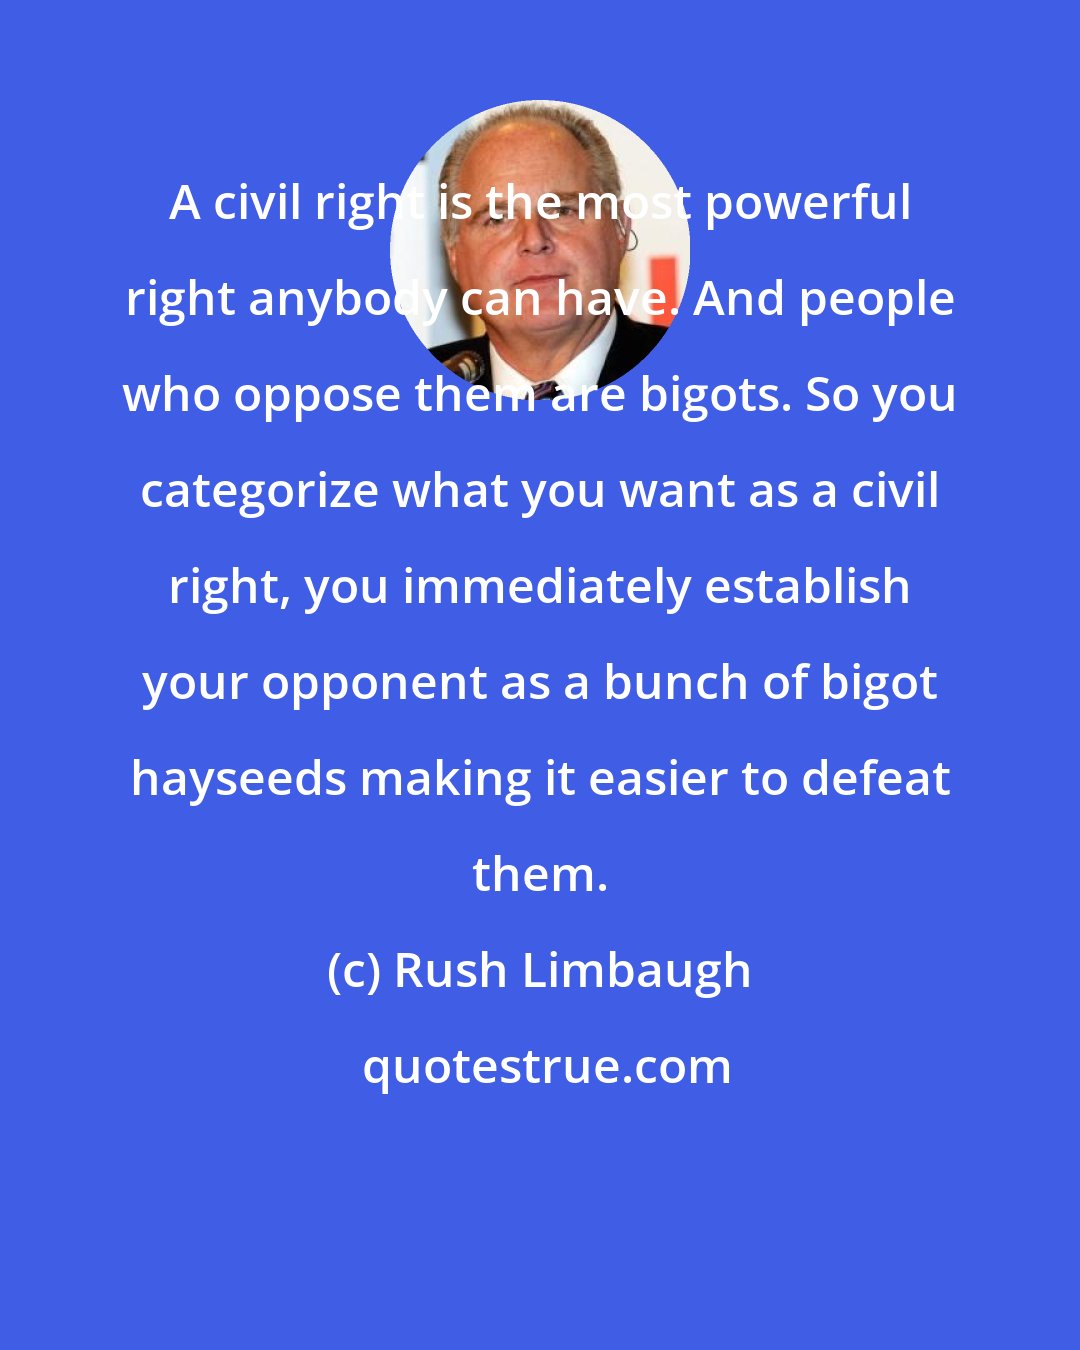 Rush Limbaugh: A civil right is the most powerful right anybody can have. And people who oppose them are bigots. So you categorize what you want as a civil right, you immediately establish your opponent as a bunch of bigot hayseeds making it easier to defeat them.